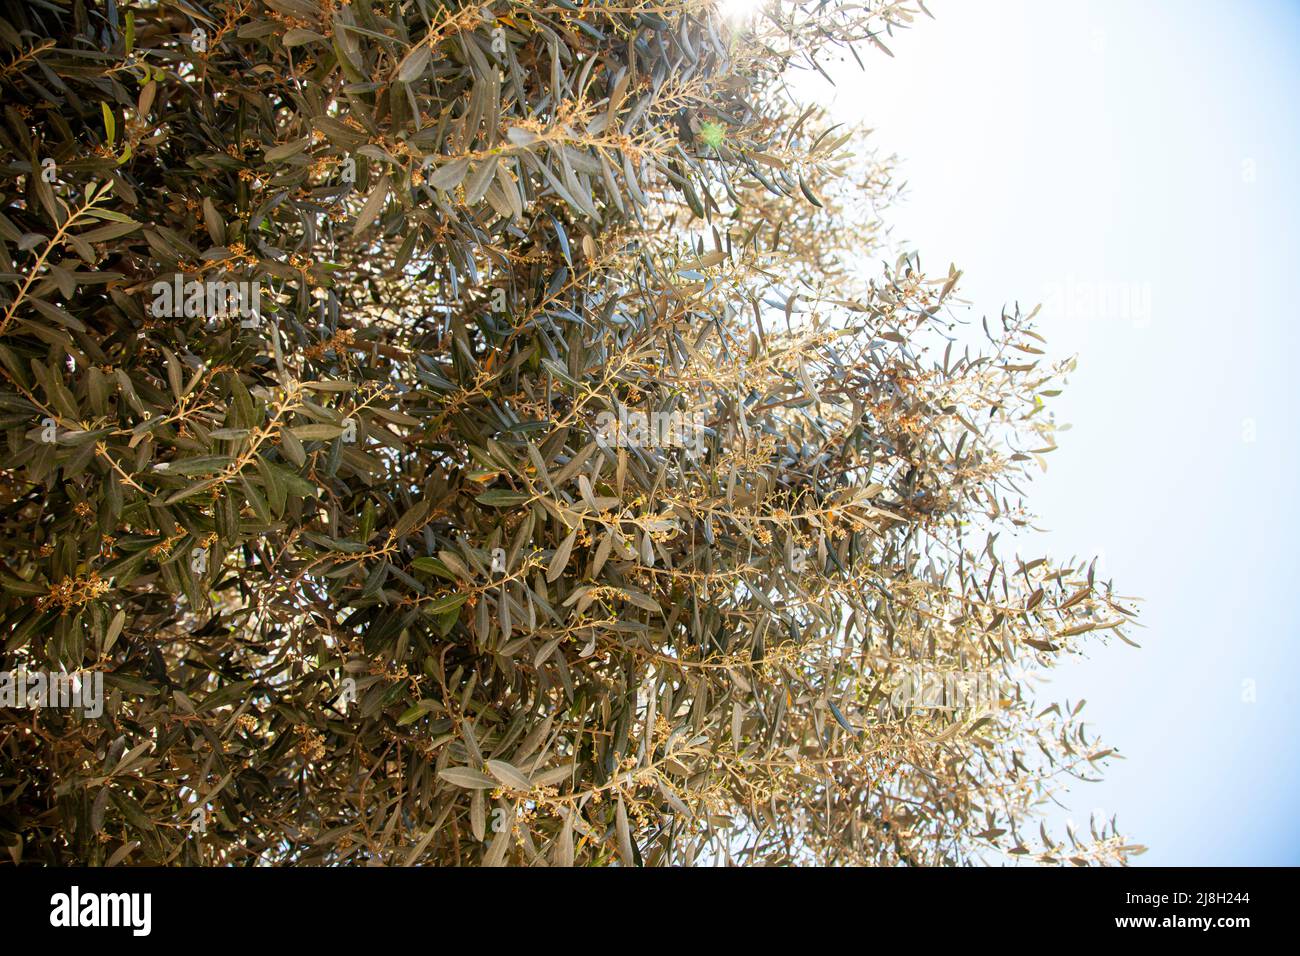 Olive tree in springtime. Olive fruits are opening. Low angle shot under a blue sky. Stock Photo